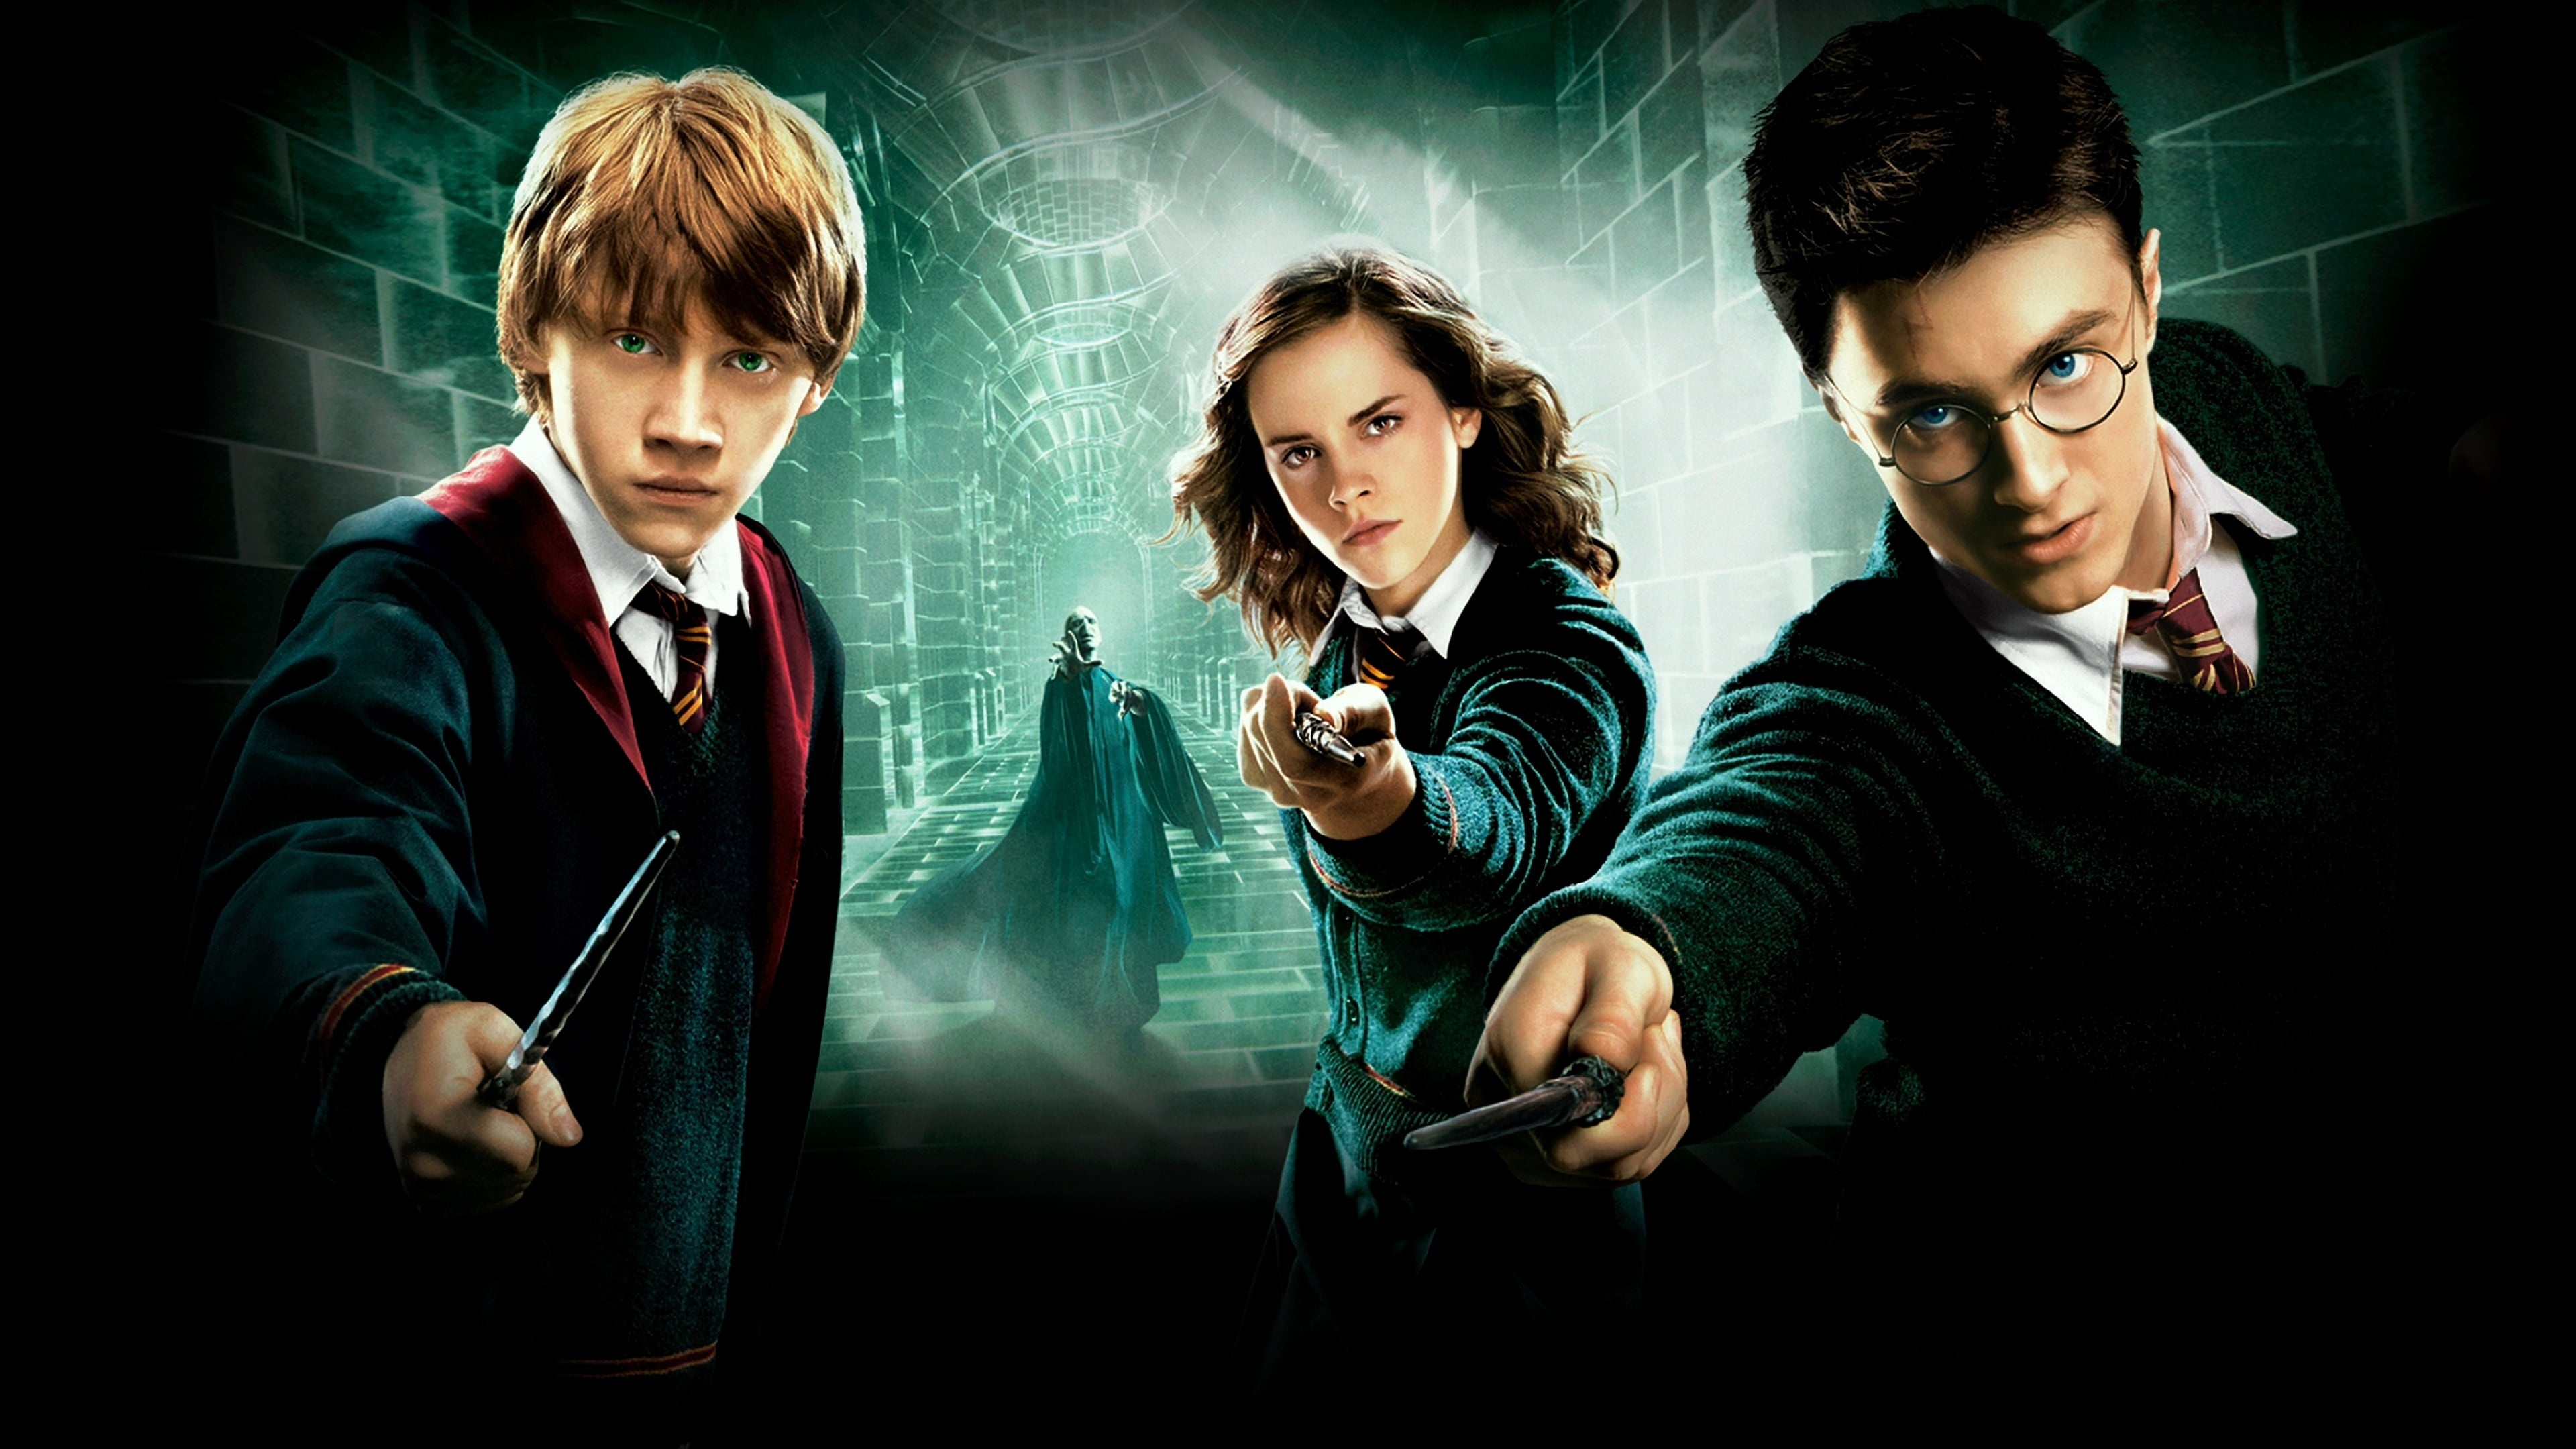 Order of the Phoenix, Movie wallpapers, Posted by Sarah Tremblay, 3840x2160 4K Desktop